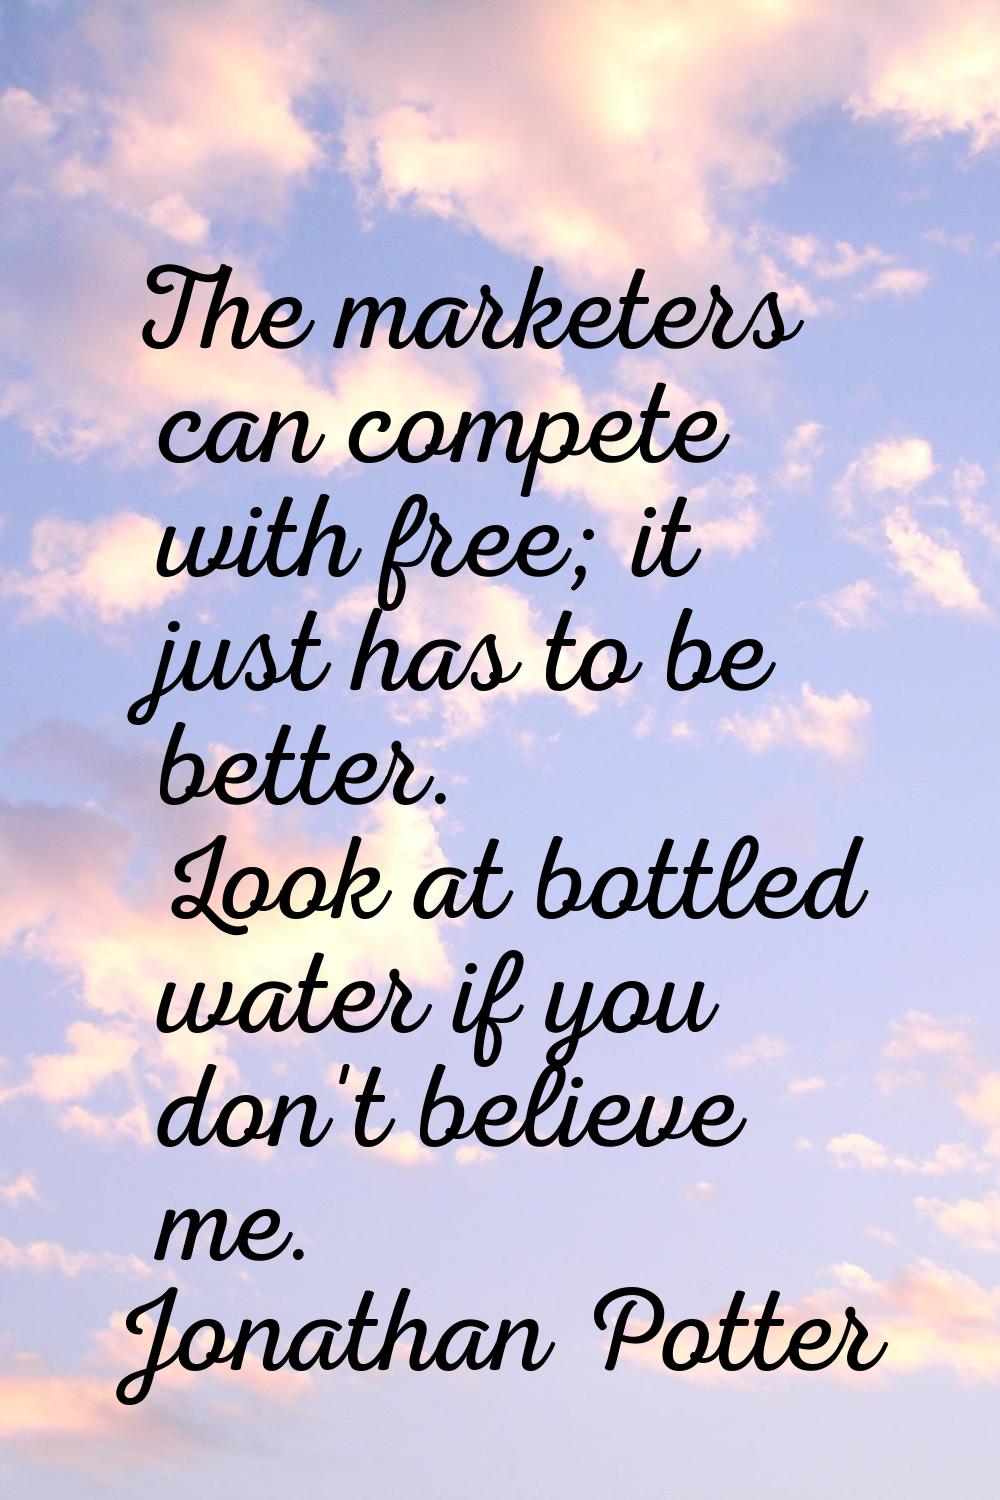 The marketers can compete with free; it just has to be better. Look at bottled water if you don't b